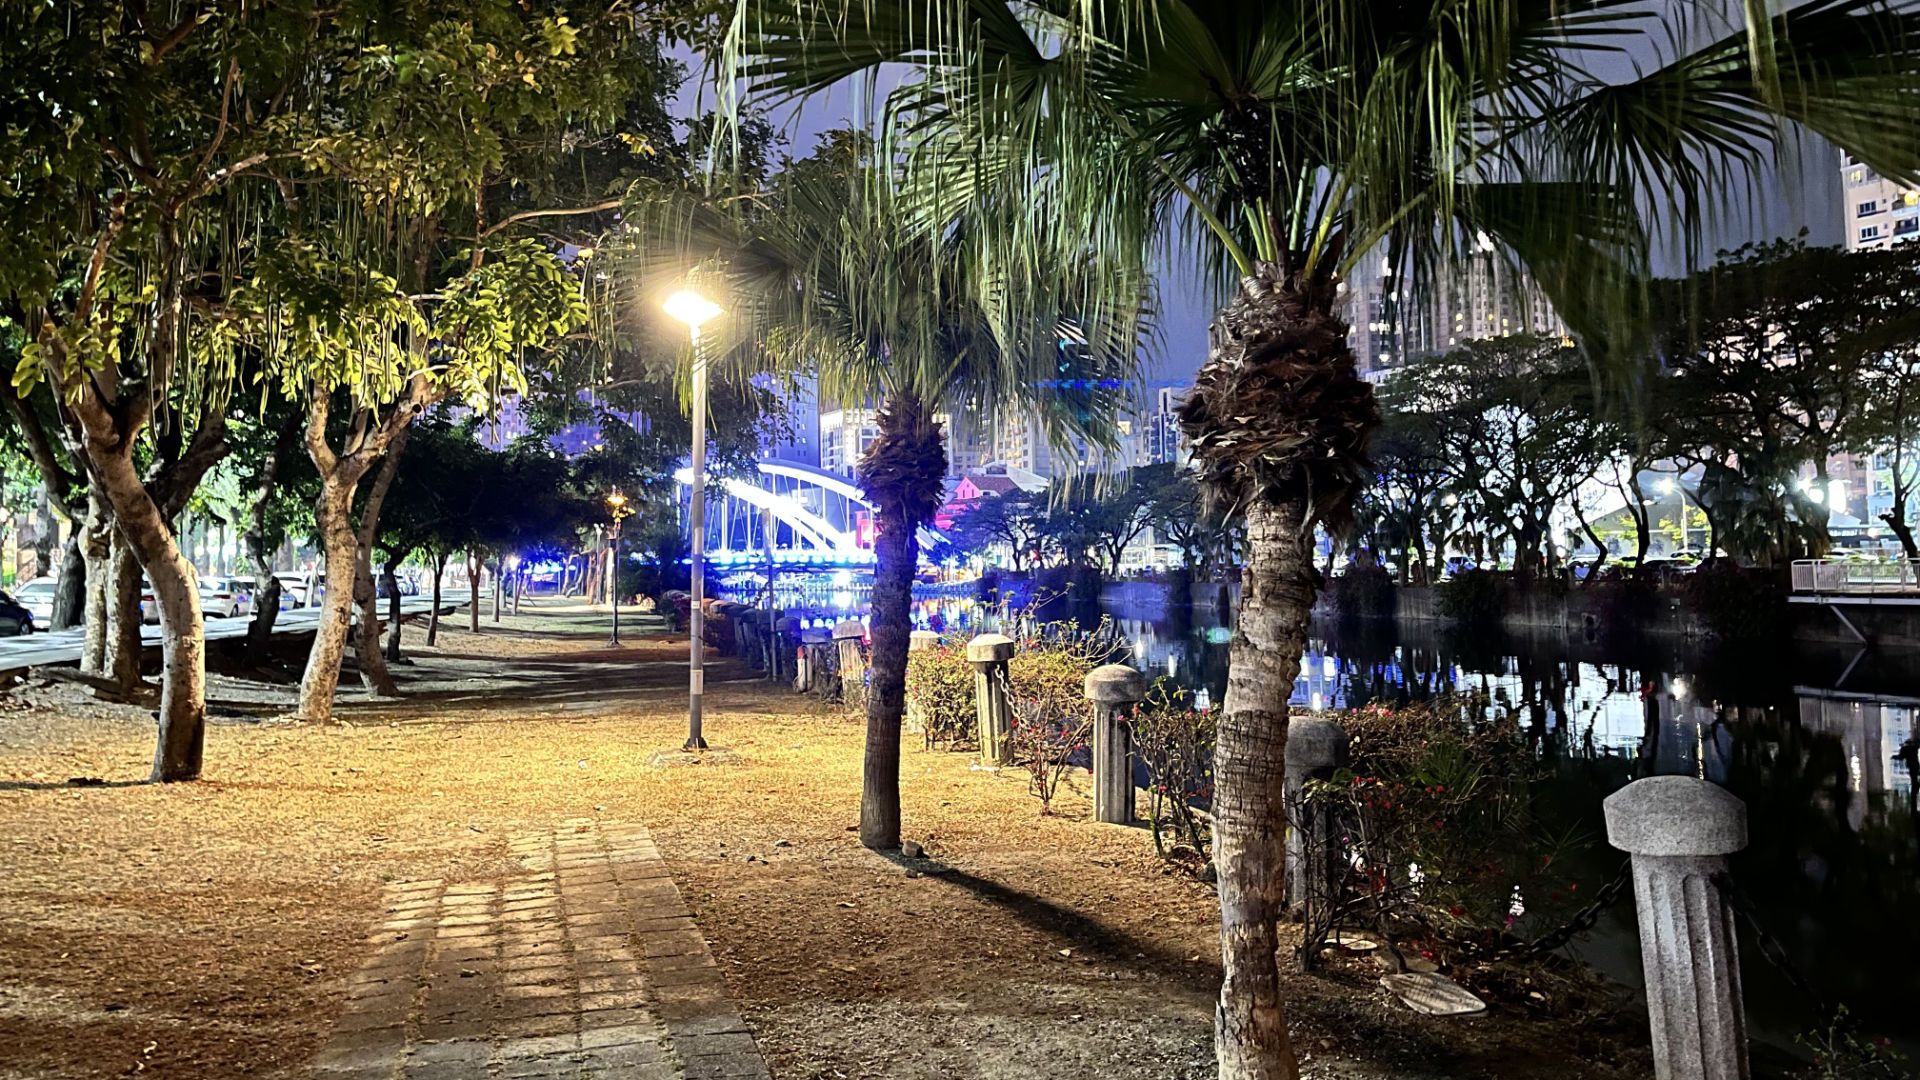 Palm trees line a path next to Love River. An arched road bridge is illuminated in neon blue, in the distance.